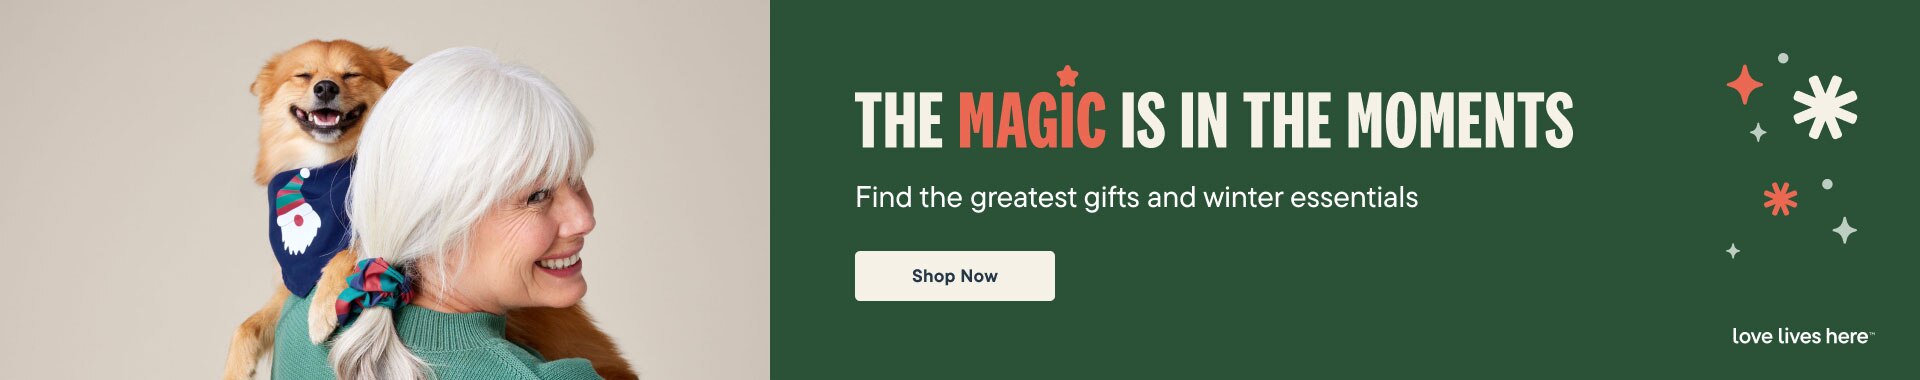 Shop now for magical gifts and winter essentials